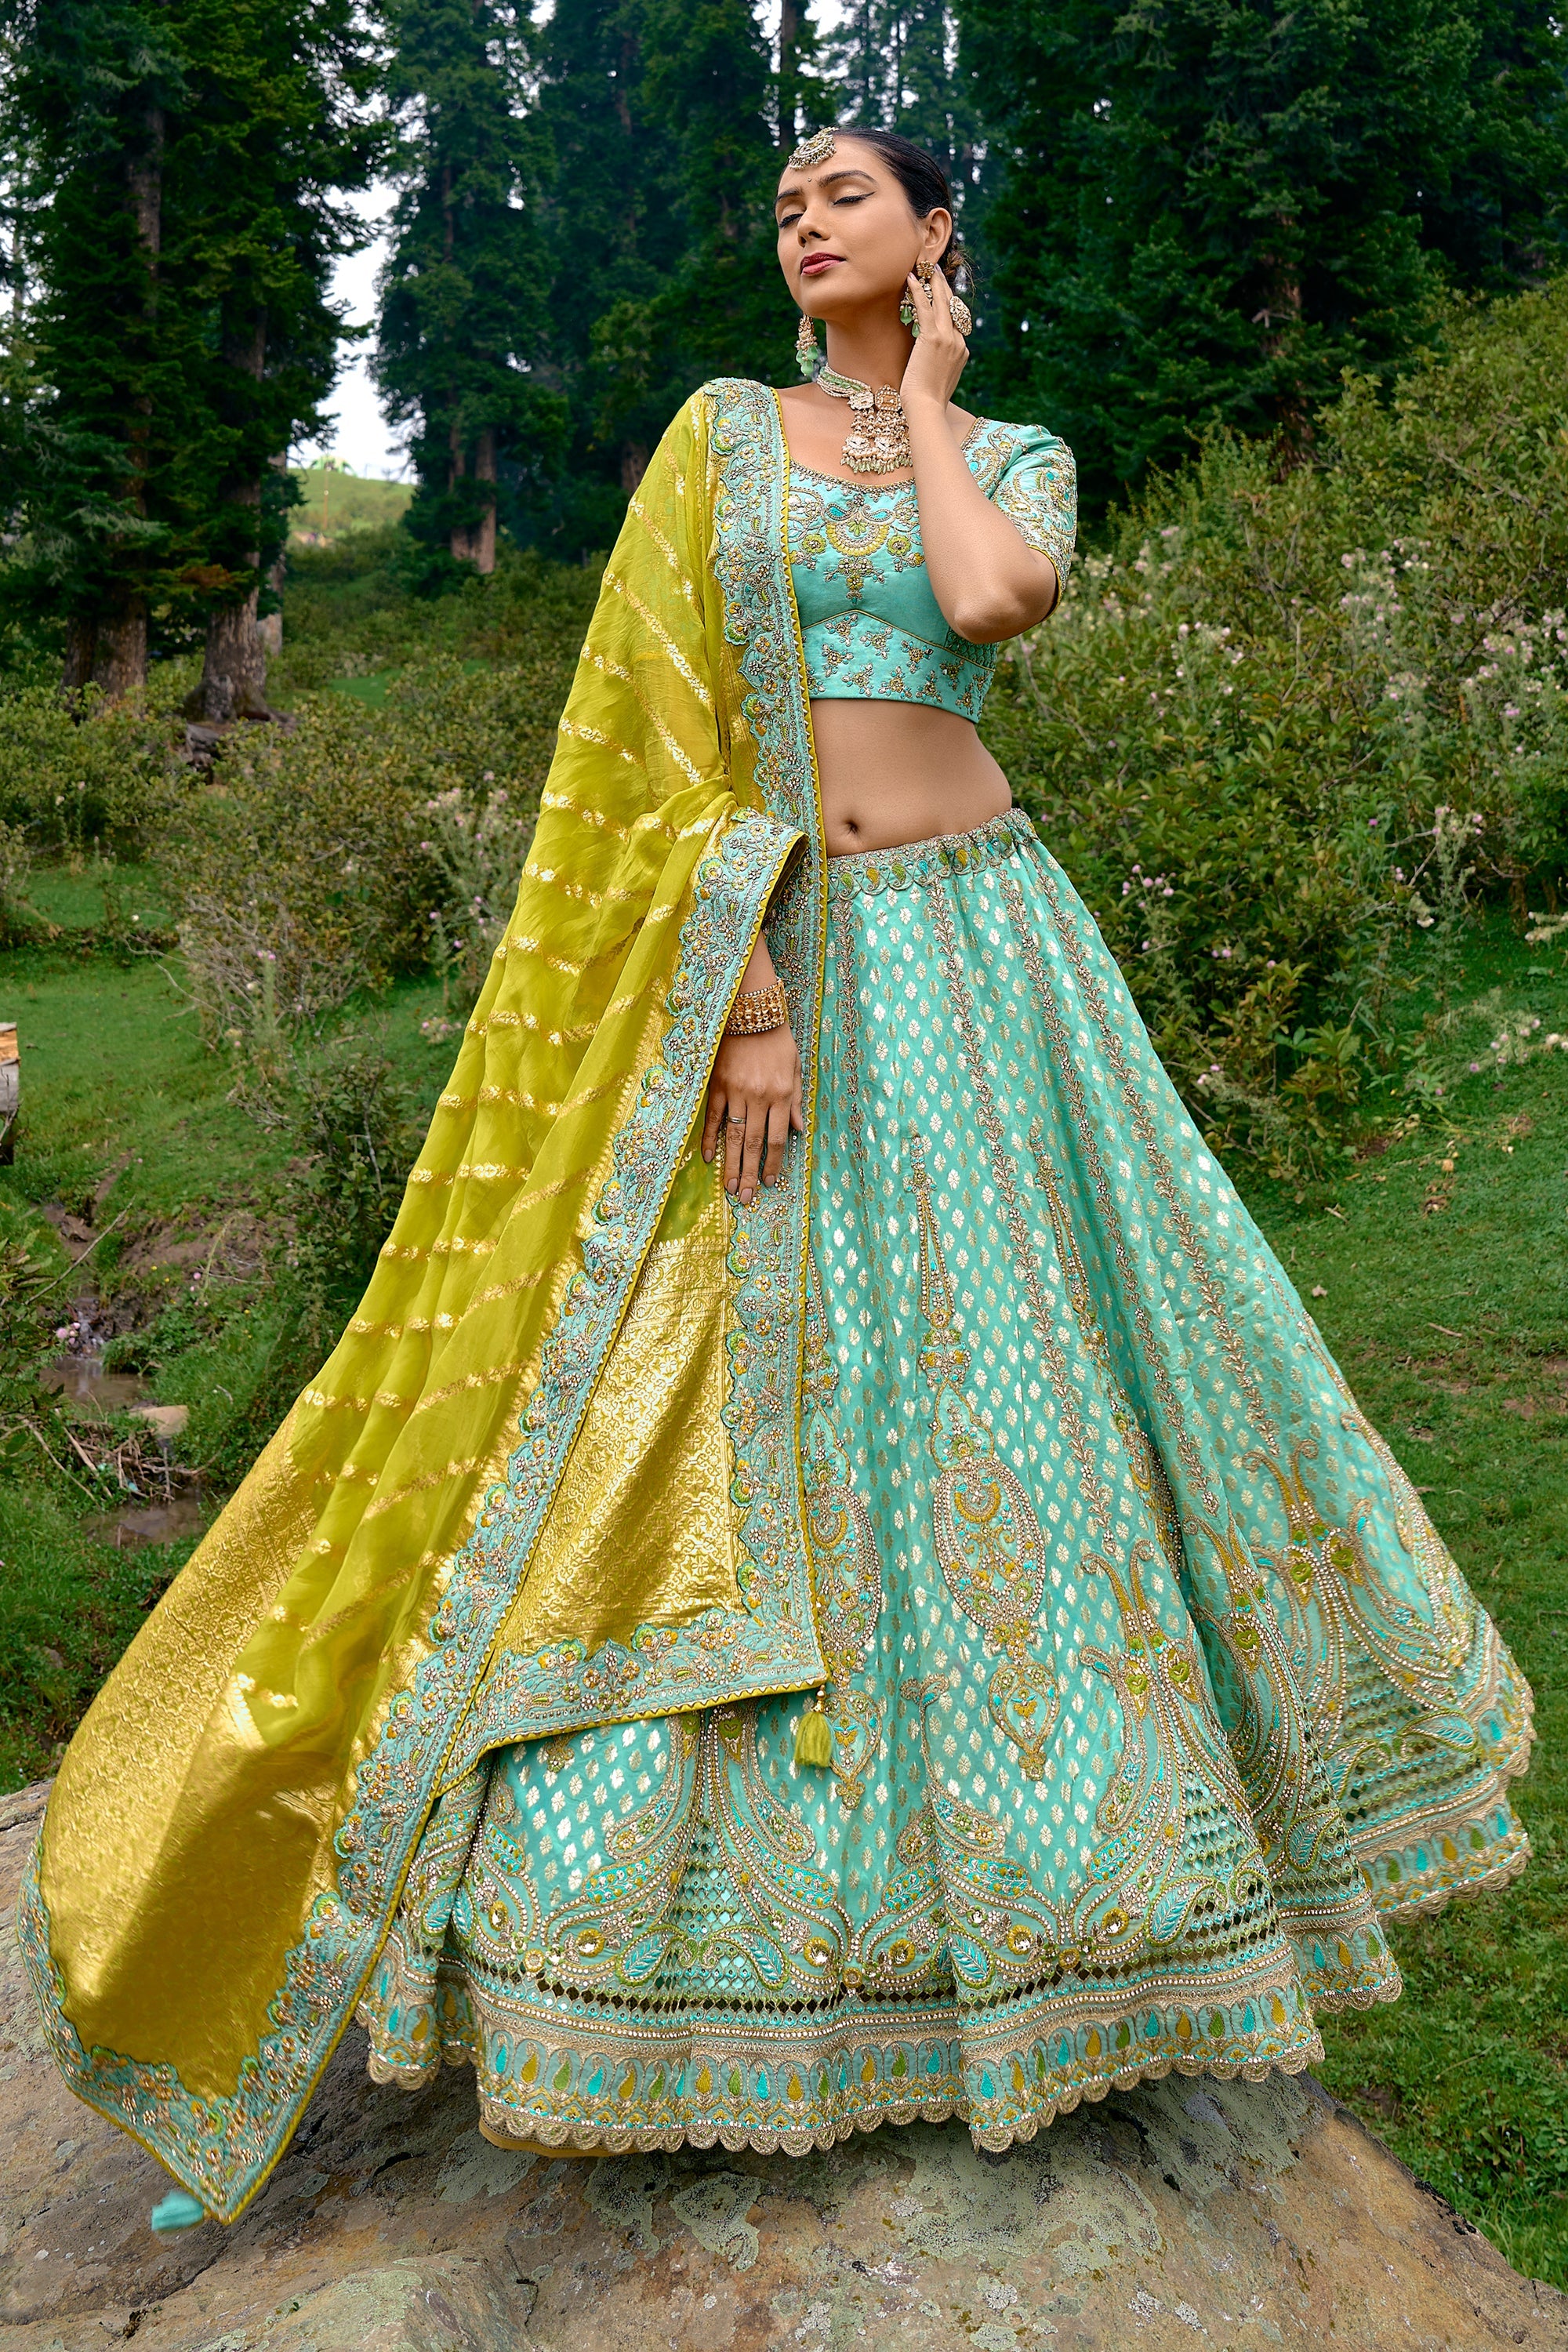 How To Choose A Bridal Outfit Based On Your Skin Tone - Pyaari Weddings